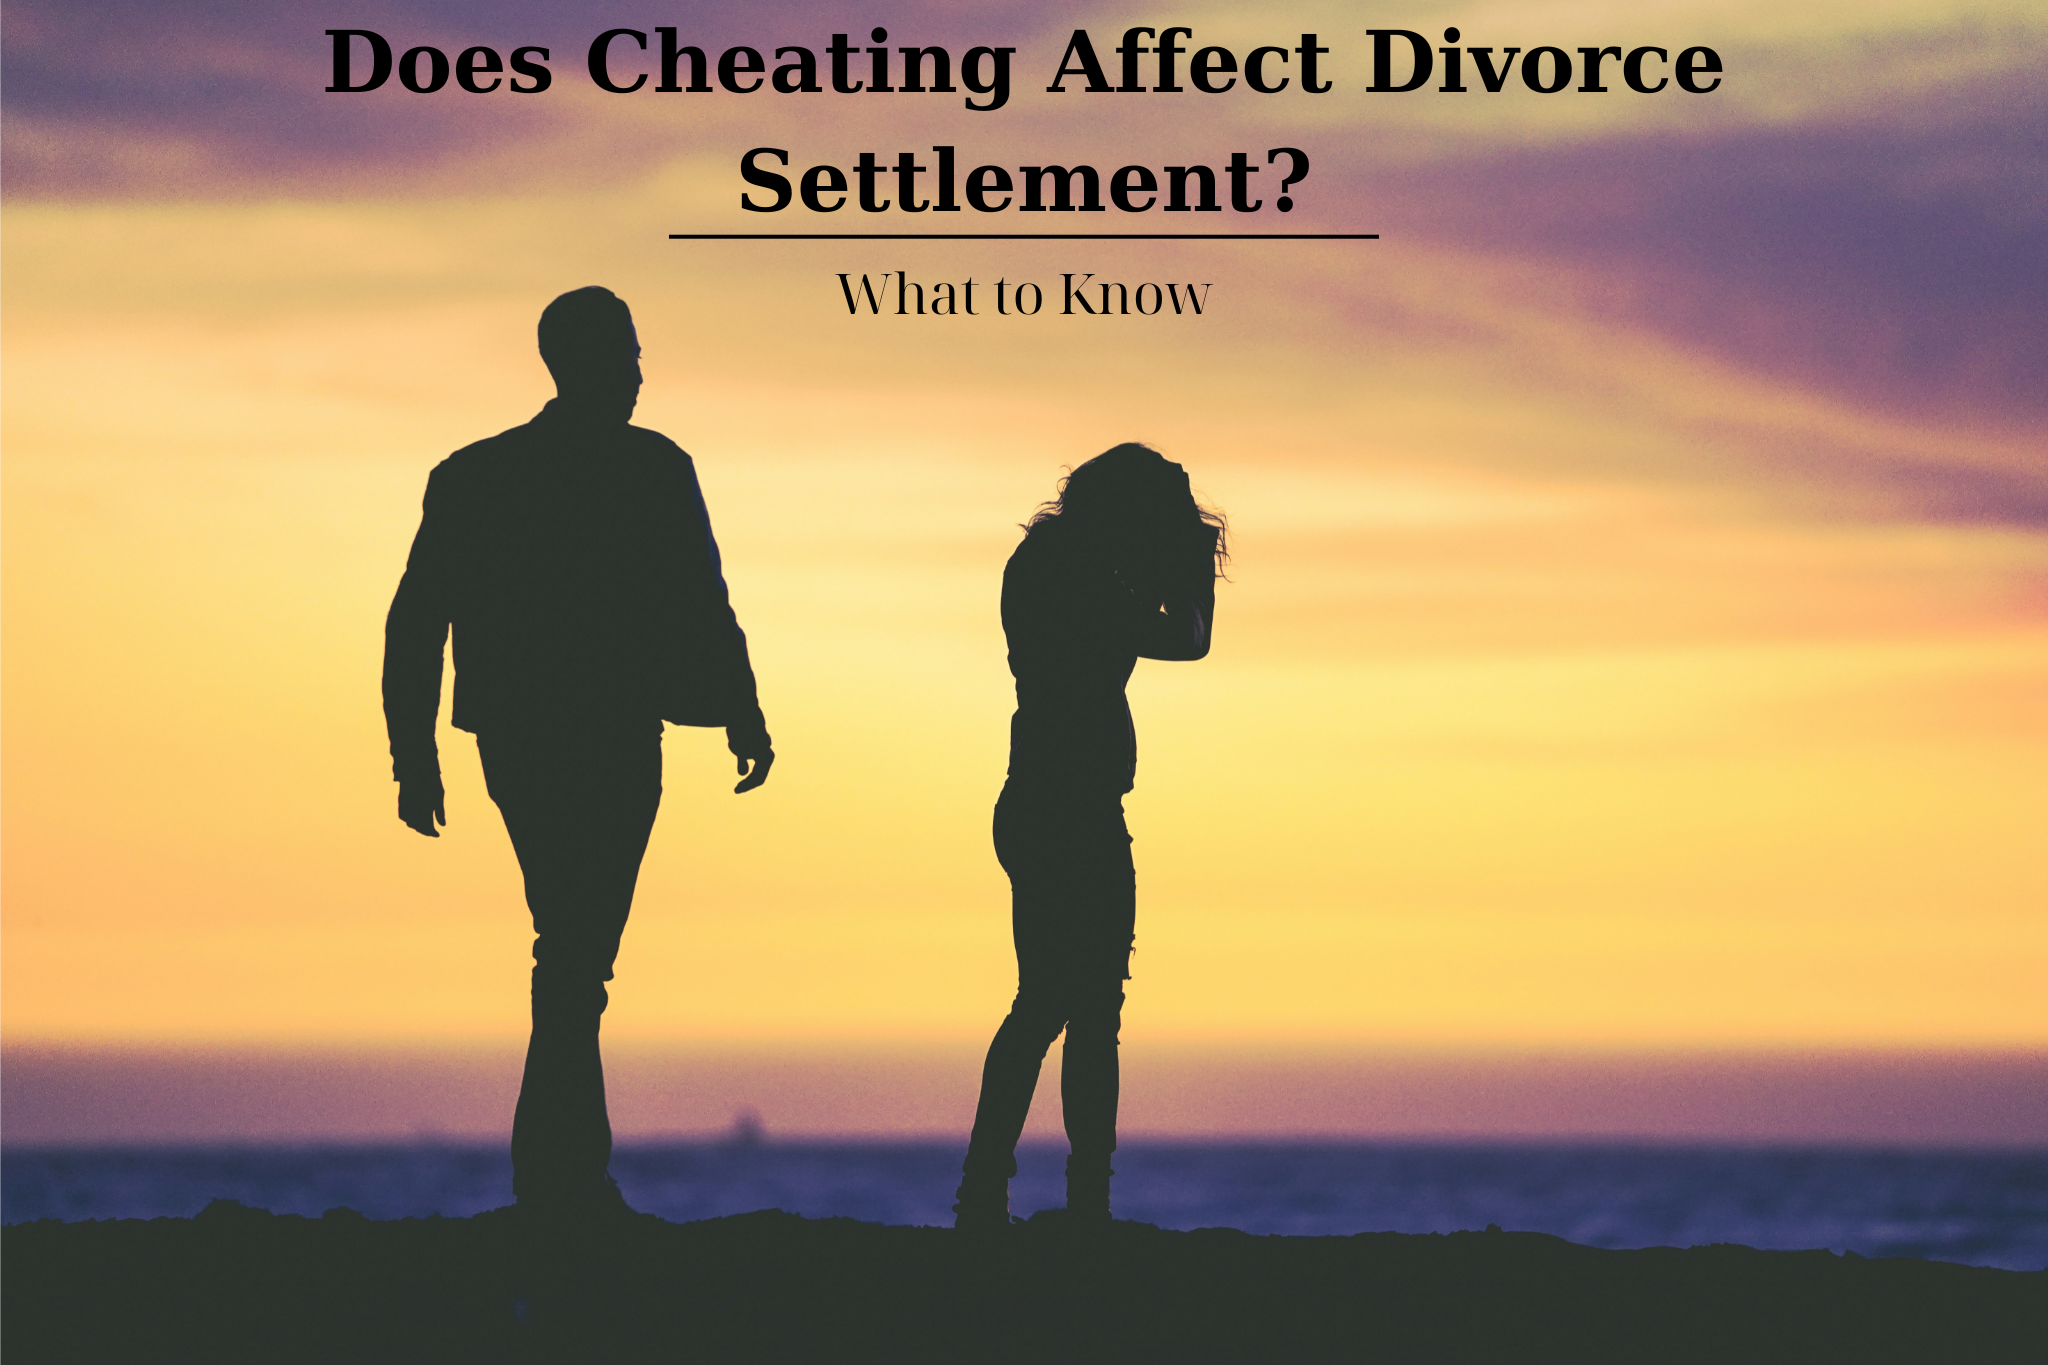 Does Cheating Affect Divorce Settlement? What to Know